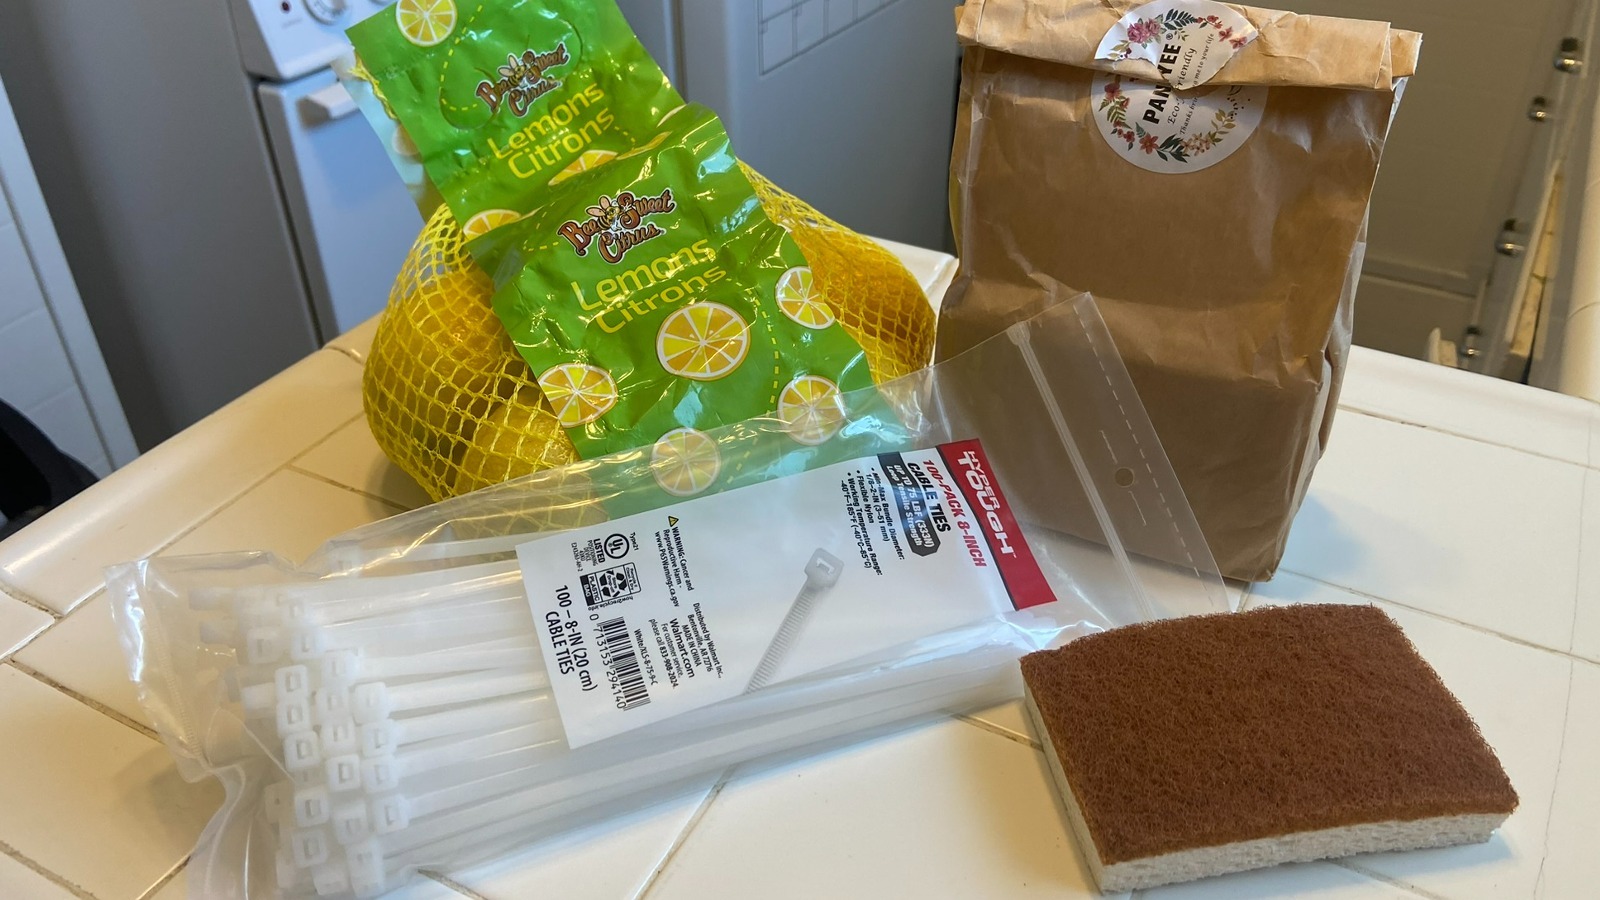 https://www.housedigest.com/img/gallery/we-tried-mesh-produce-bags-as-a-pot-scrubber-with-tk-results/l-intro-1685558234.jpg